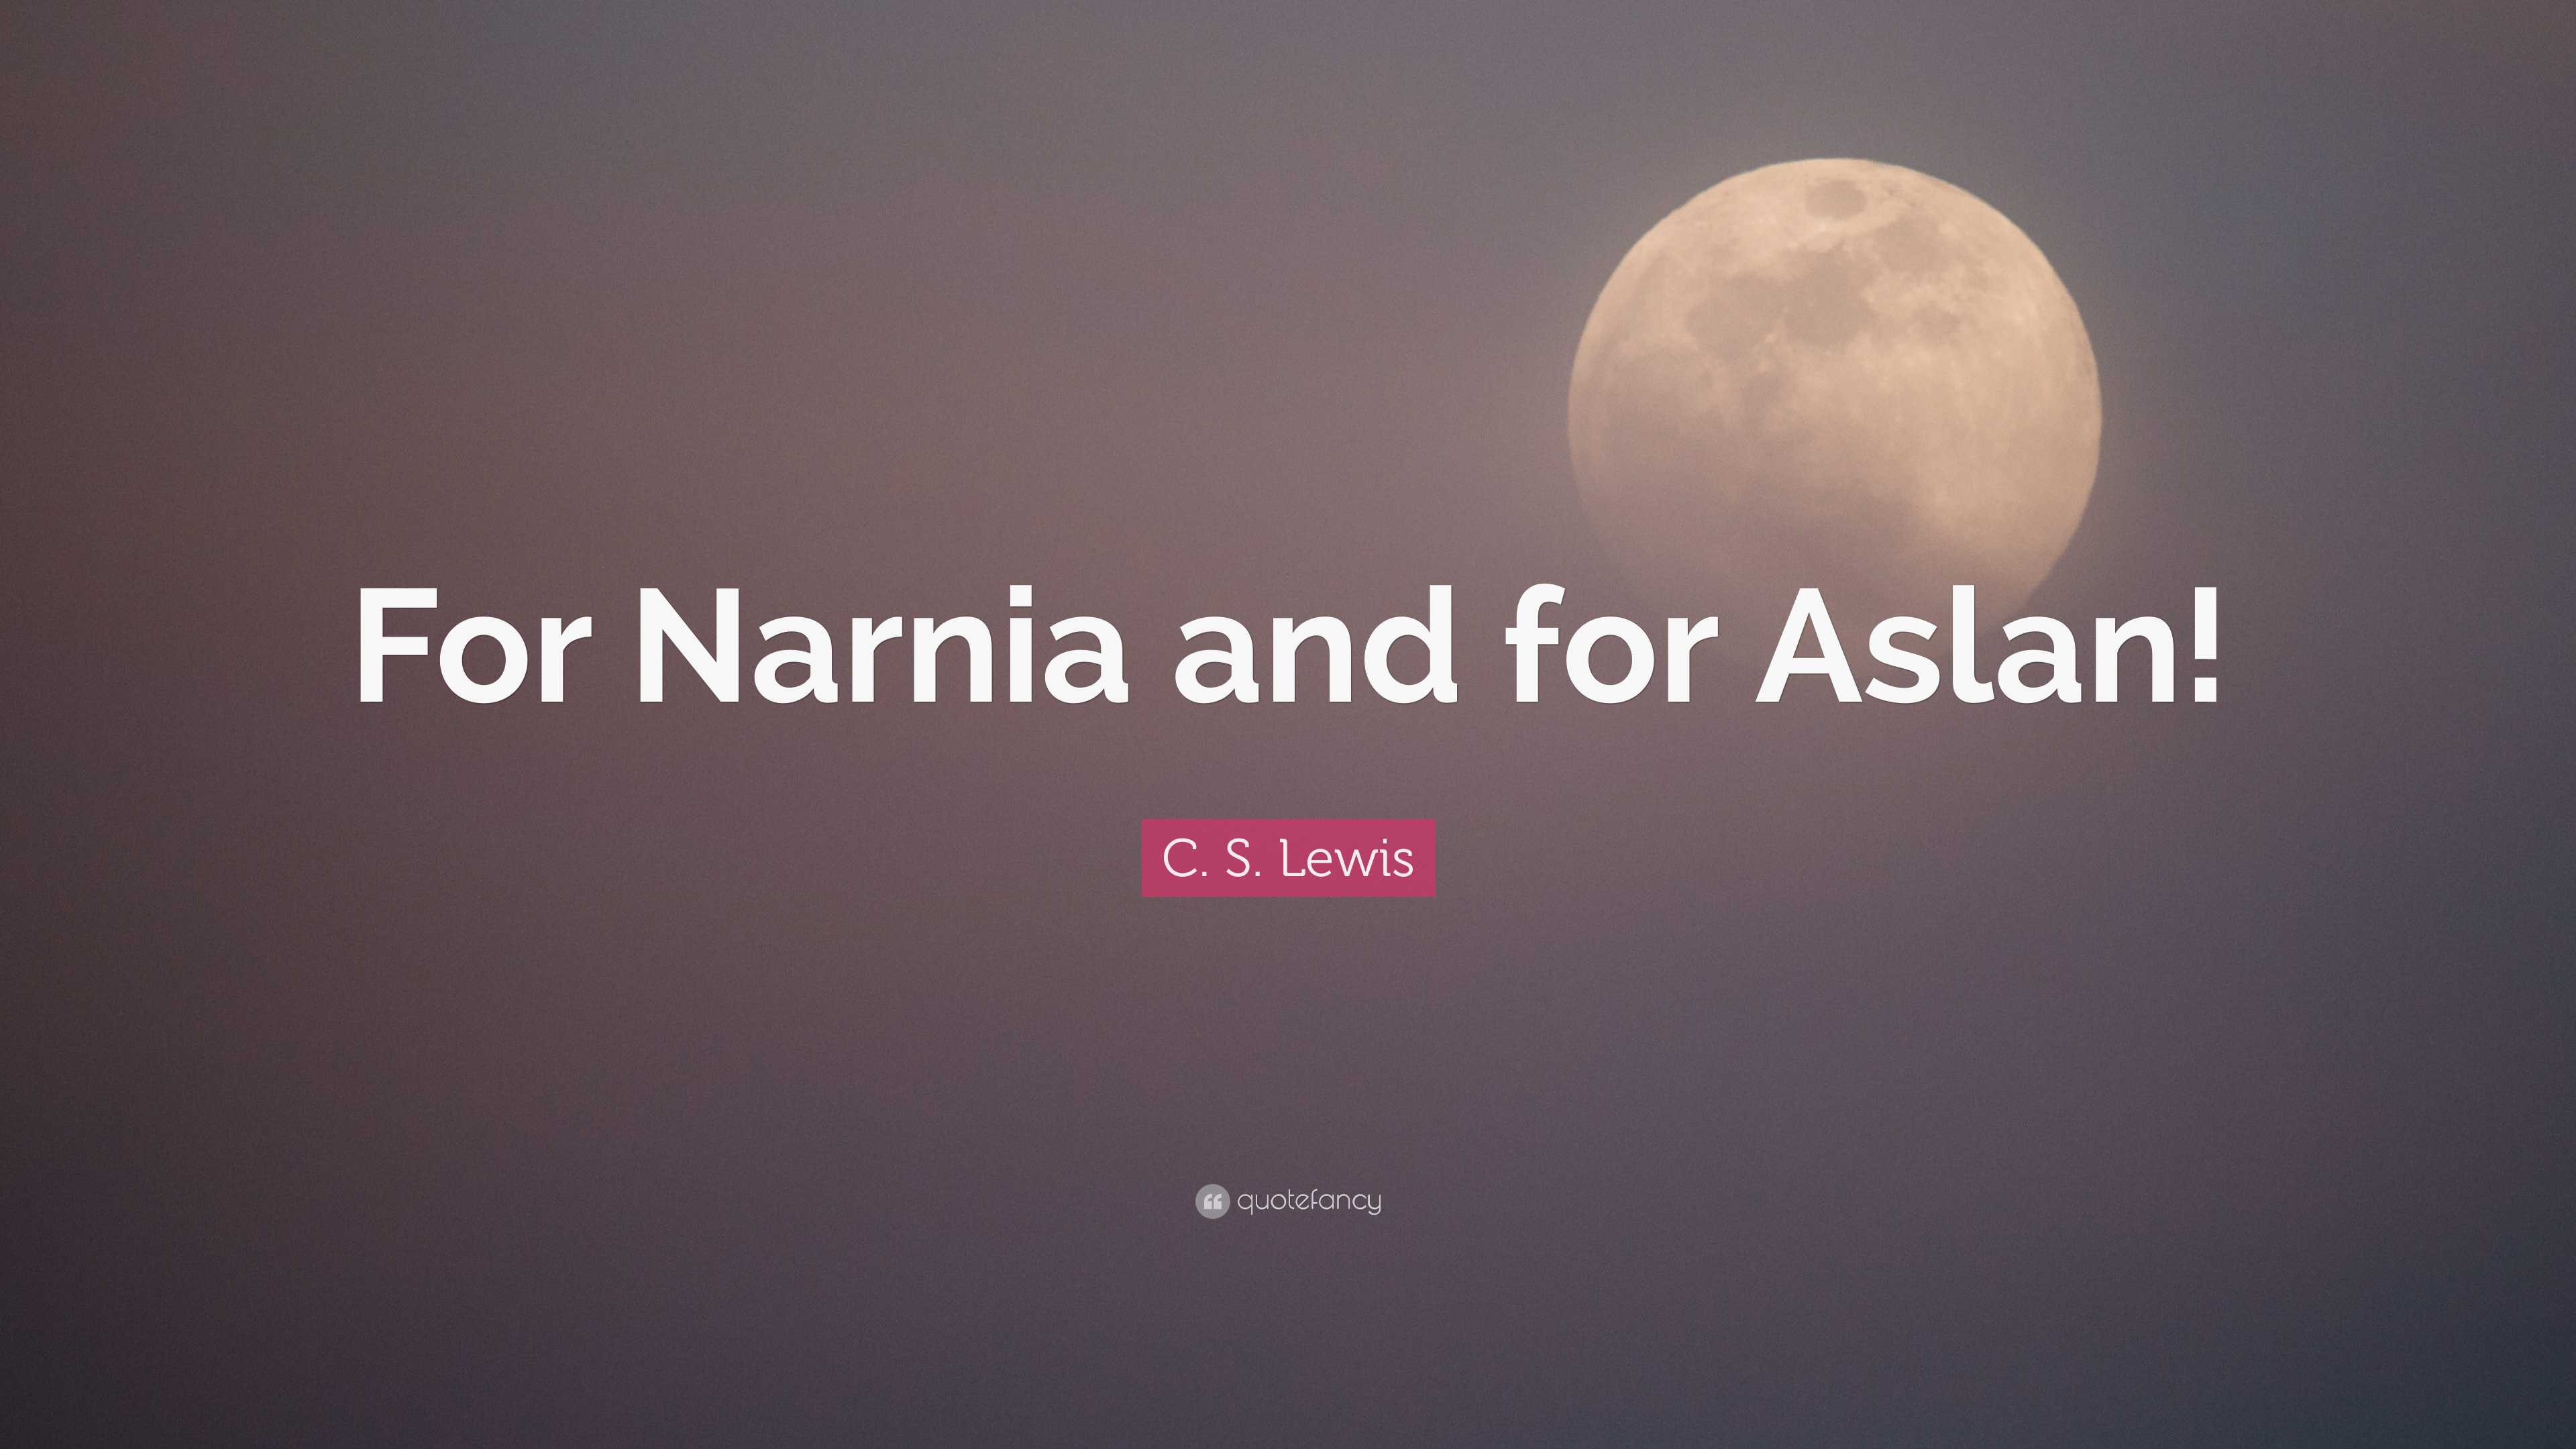 C. S. Lewis quote: For Narnia and for Aslan!